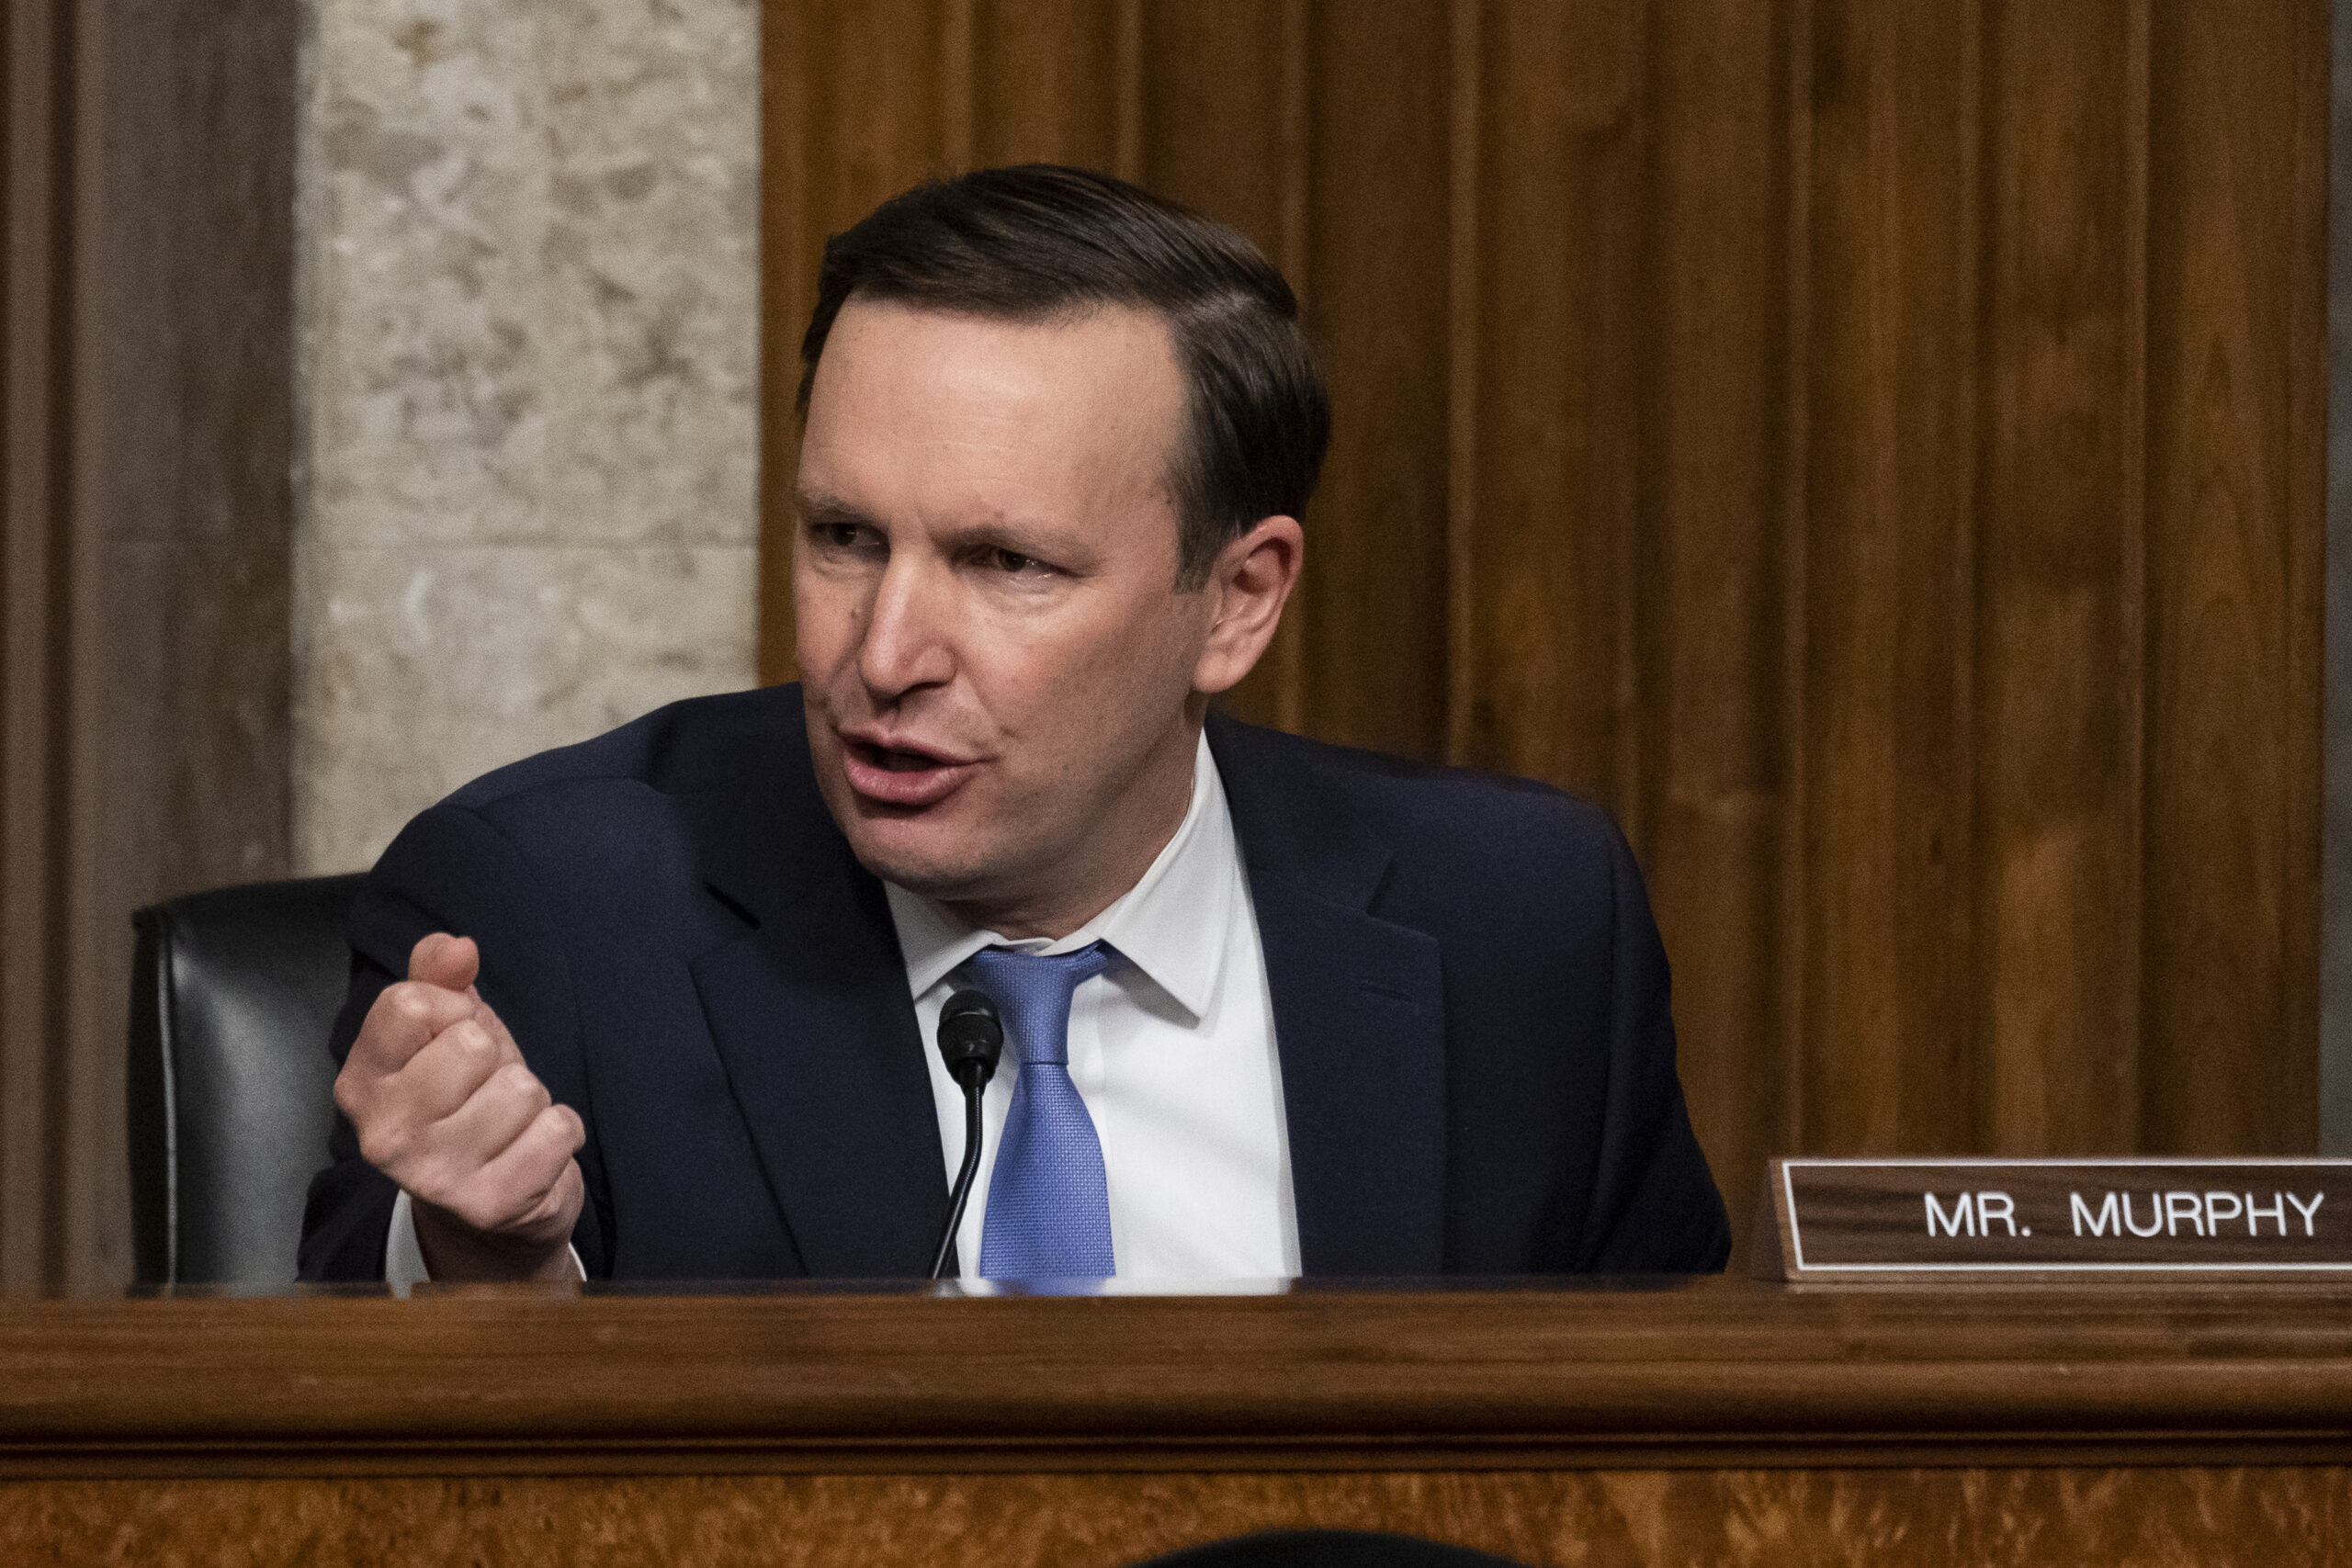 FILE - U.S. Sen. Chris Murphy, D-Conn., speaks during a hearing of the Senate Foreign Relations on Capitol Hill, on Dec. 7, 2021, in Washington. Murphy, who came to Congress representing Sandy Hook, begged his colleagues to finally pass legislation addressing the nation’s gun violence problem as the latest school shooting unfolded Tuesday, May 24, 2022, in Uvalde, Texas. (AP Photo/Alex Brandon, Pool, File)